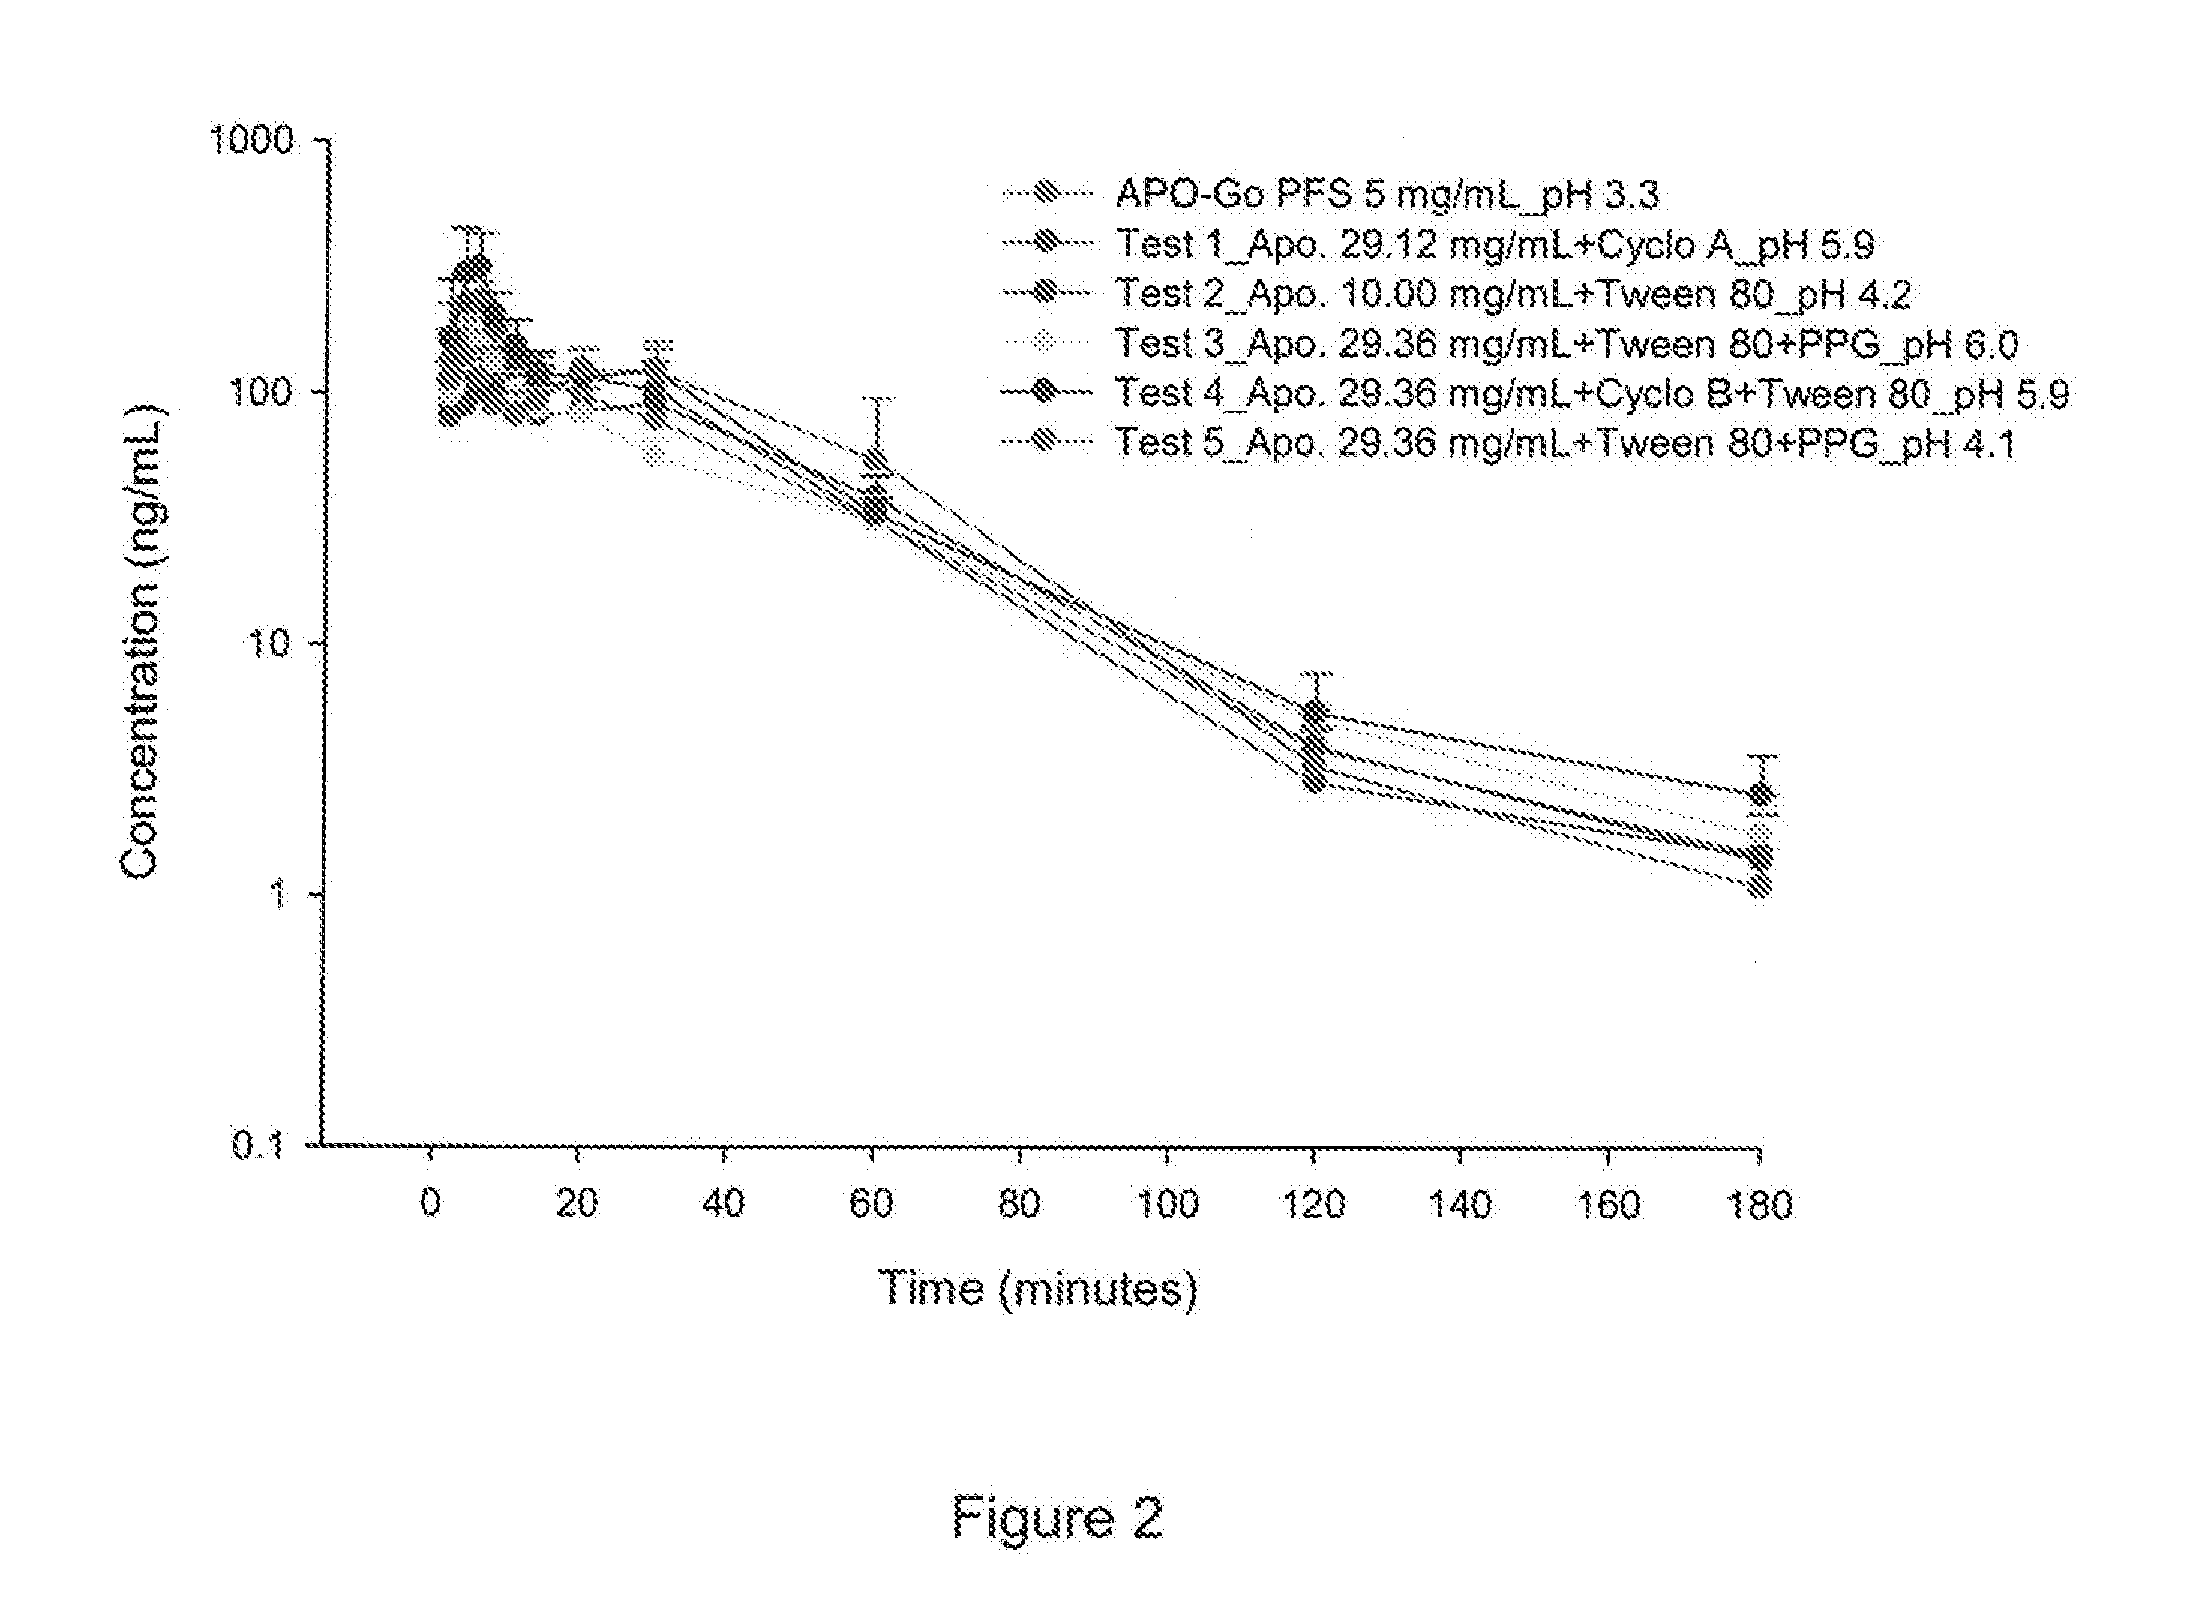 Therapeutical composition containing apomorphine as active ingredient